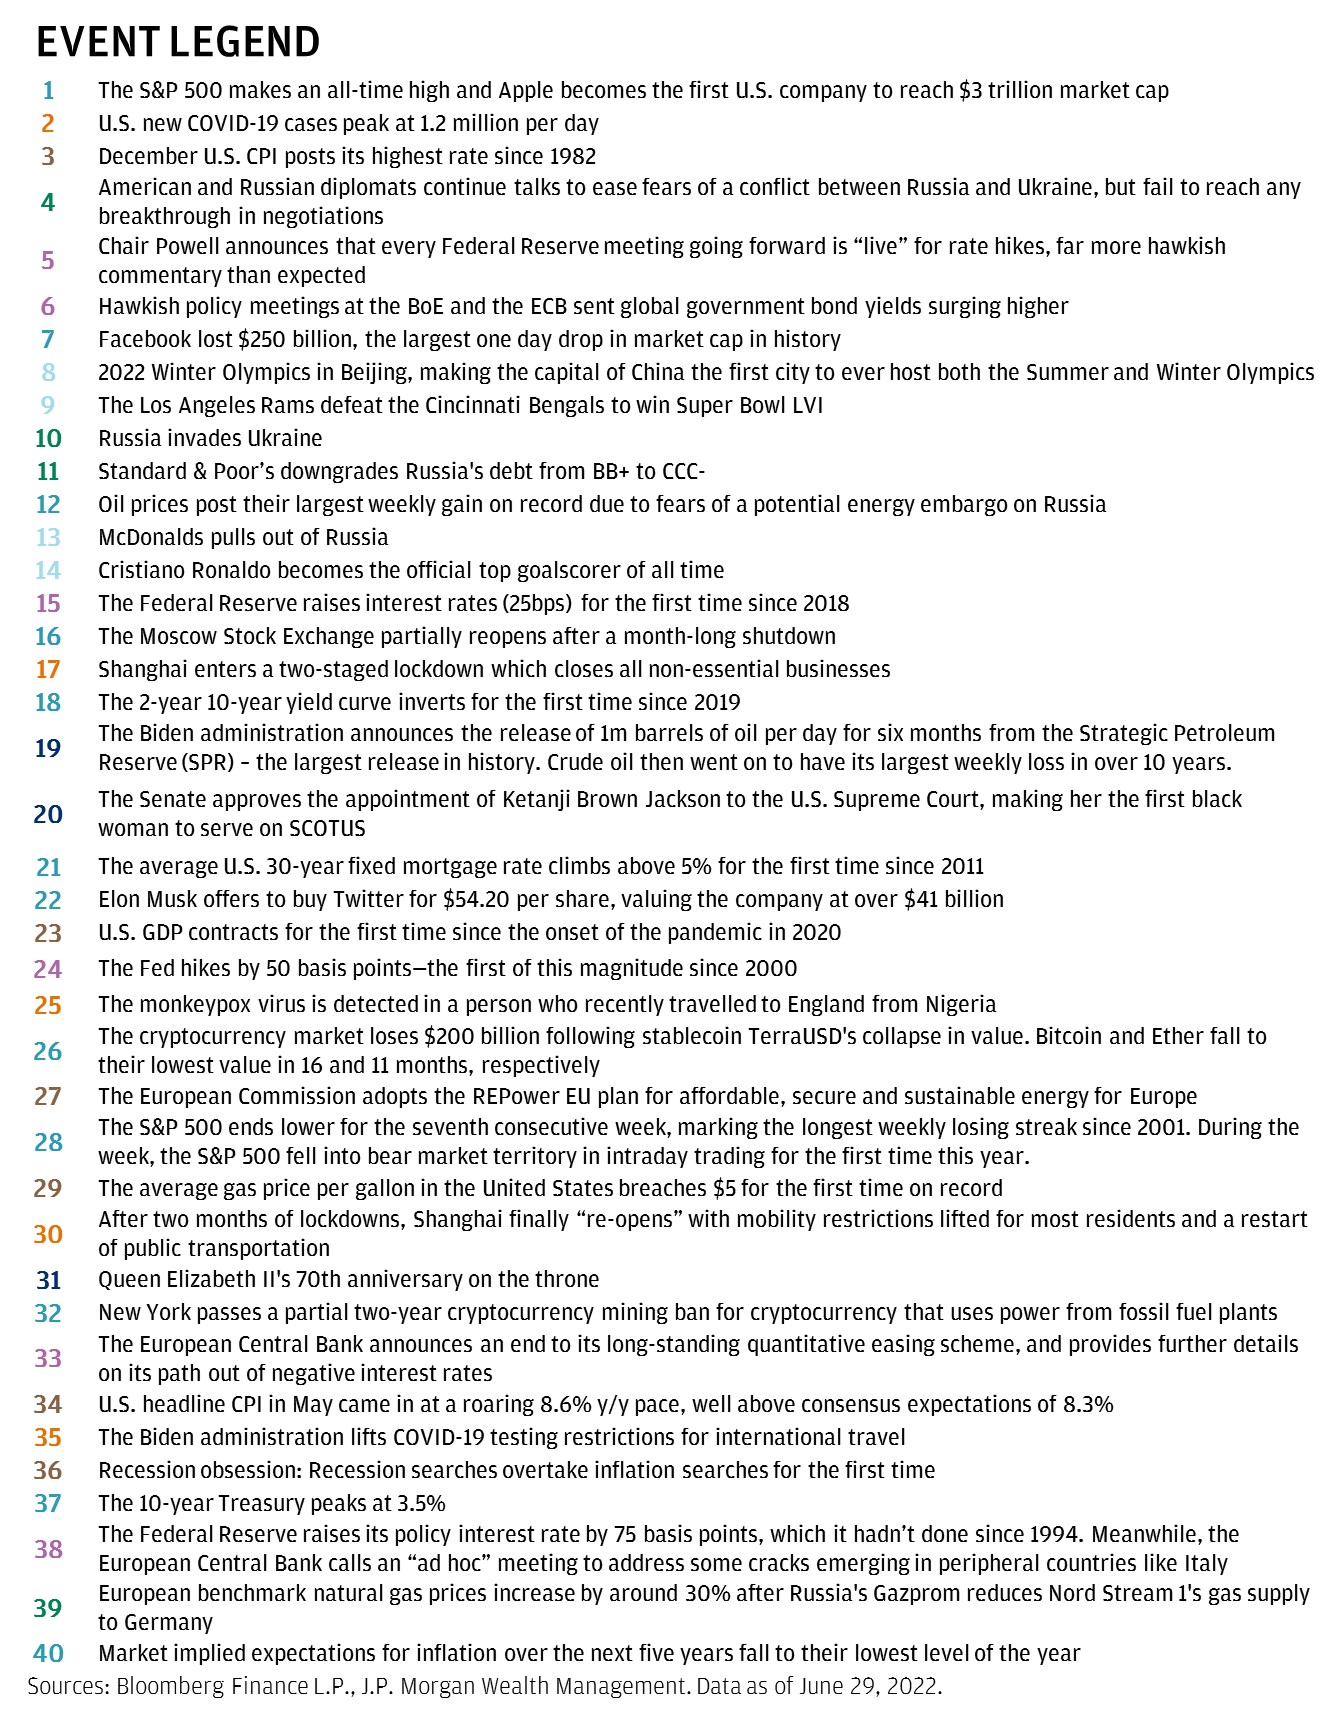 This table shows the 40 events that occurred between January 2022 and June 2022